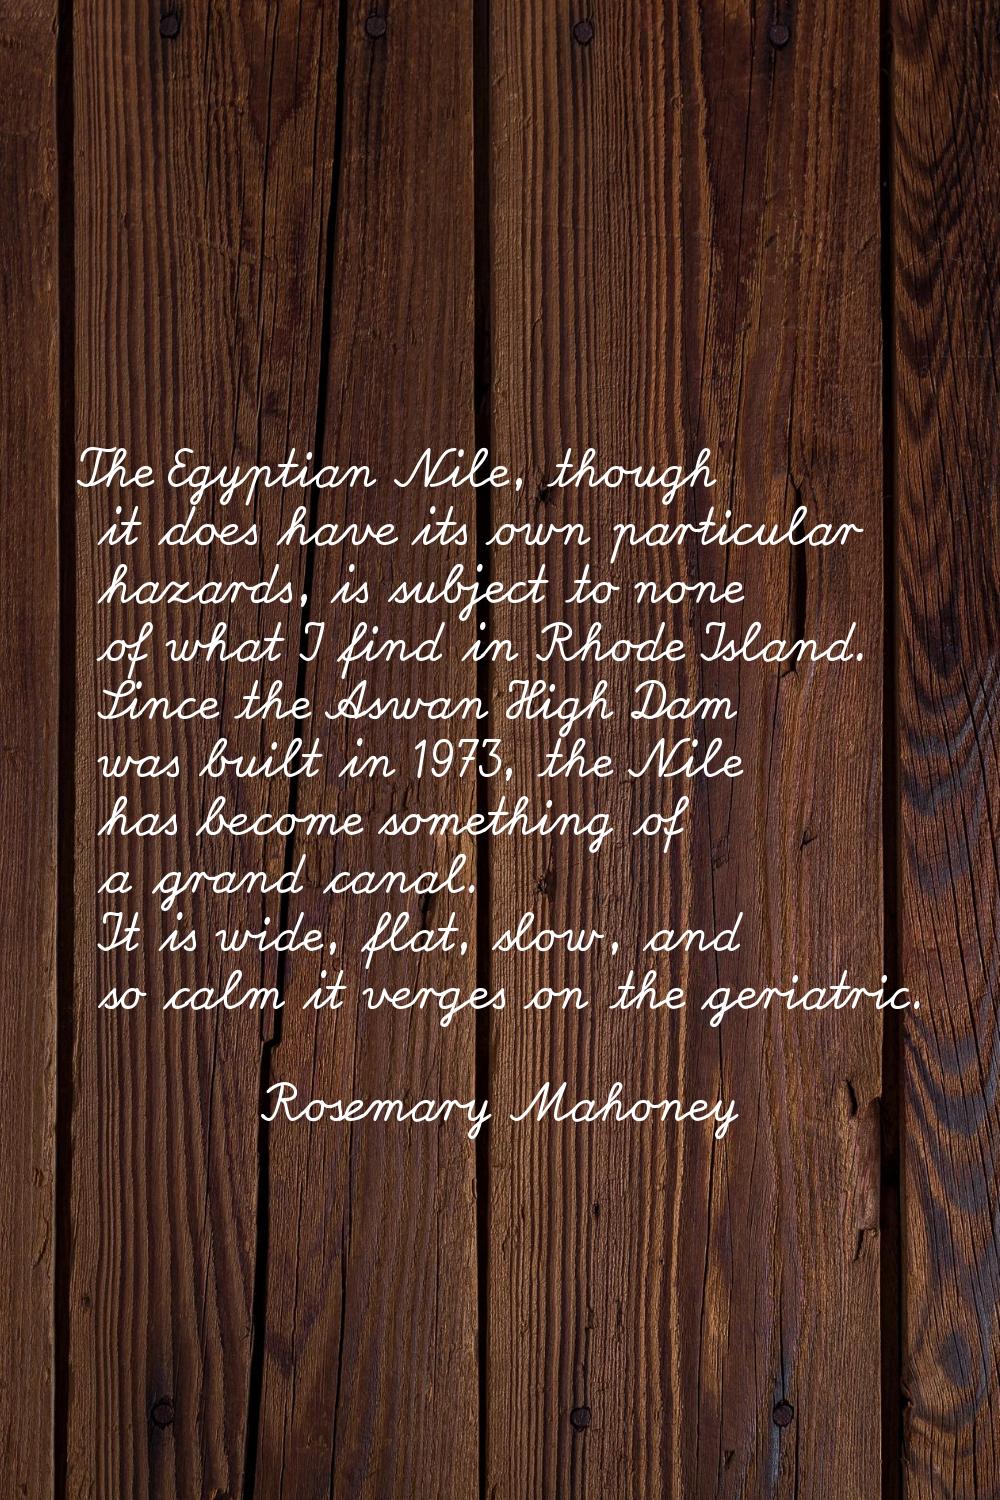 The Egyptian Nile, though it does have its own particular hazards, is subject to none of what I fin